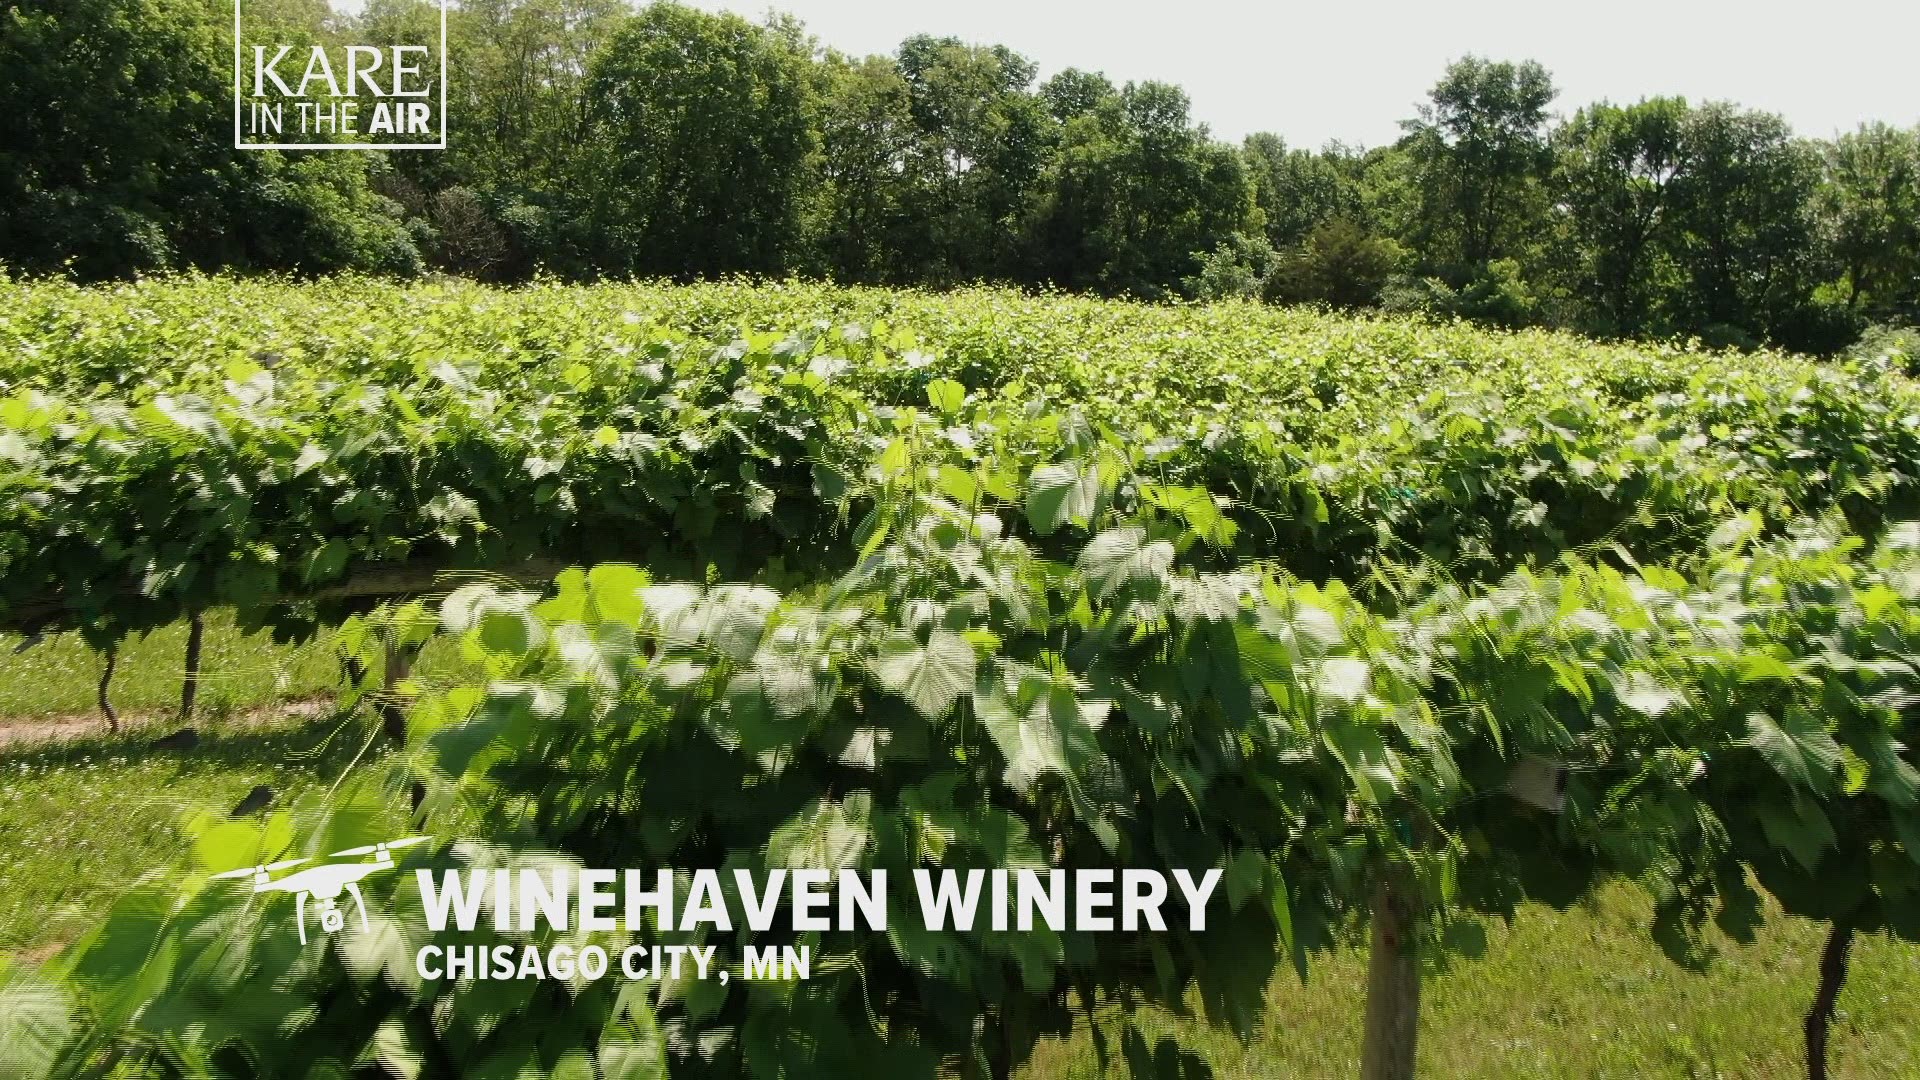 About 35 miles north of the Twin Cities, lakes and hillsides offer natural protection for a scenic winery.